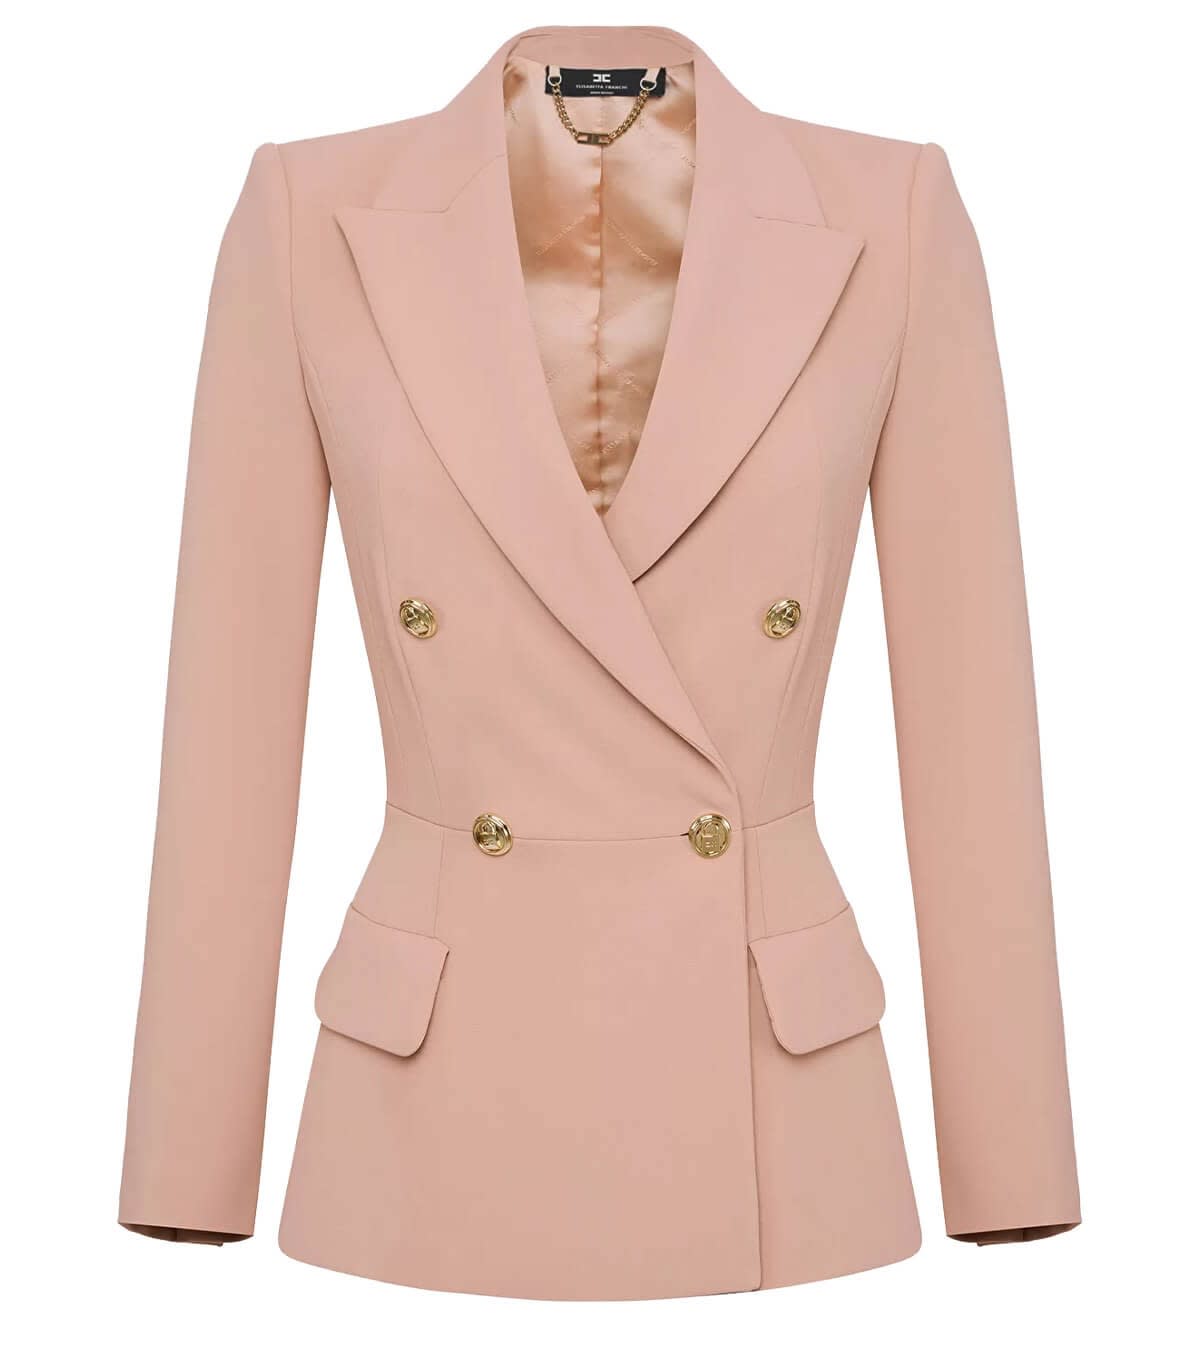 Elisabetta Franchi Nude Pink Double-breasted Suit Jacket